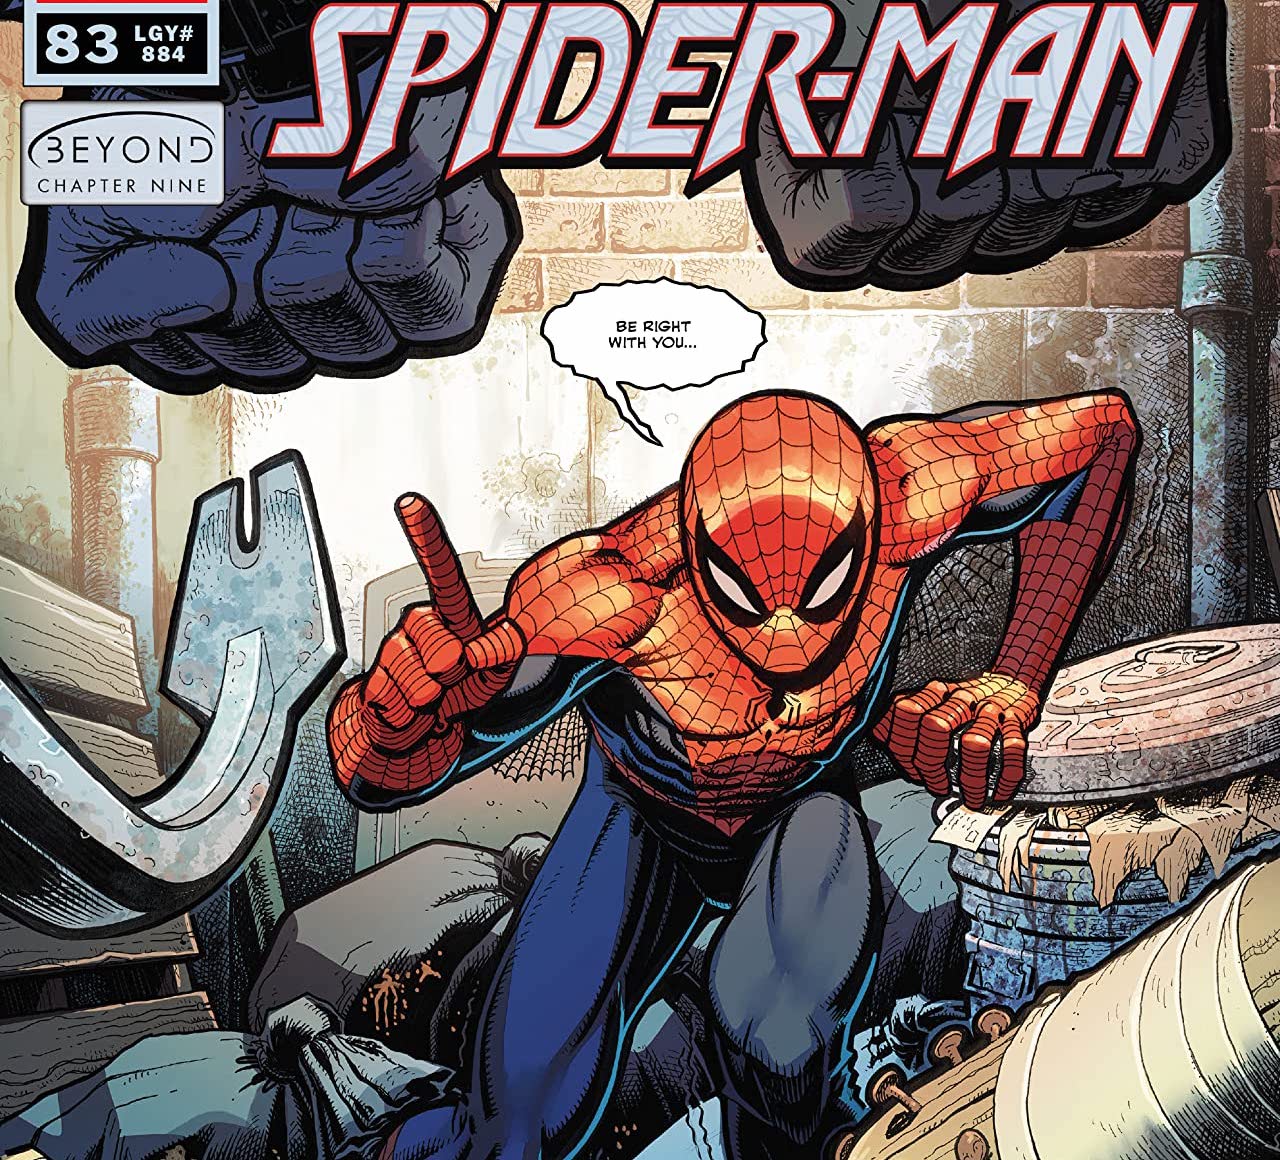 'Amazing Spider-Man' #83 features Peter Parker fighting his powers